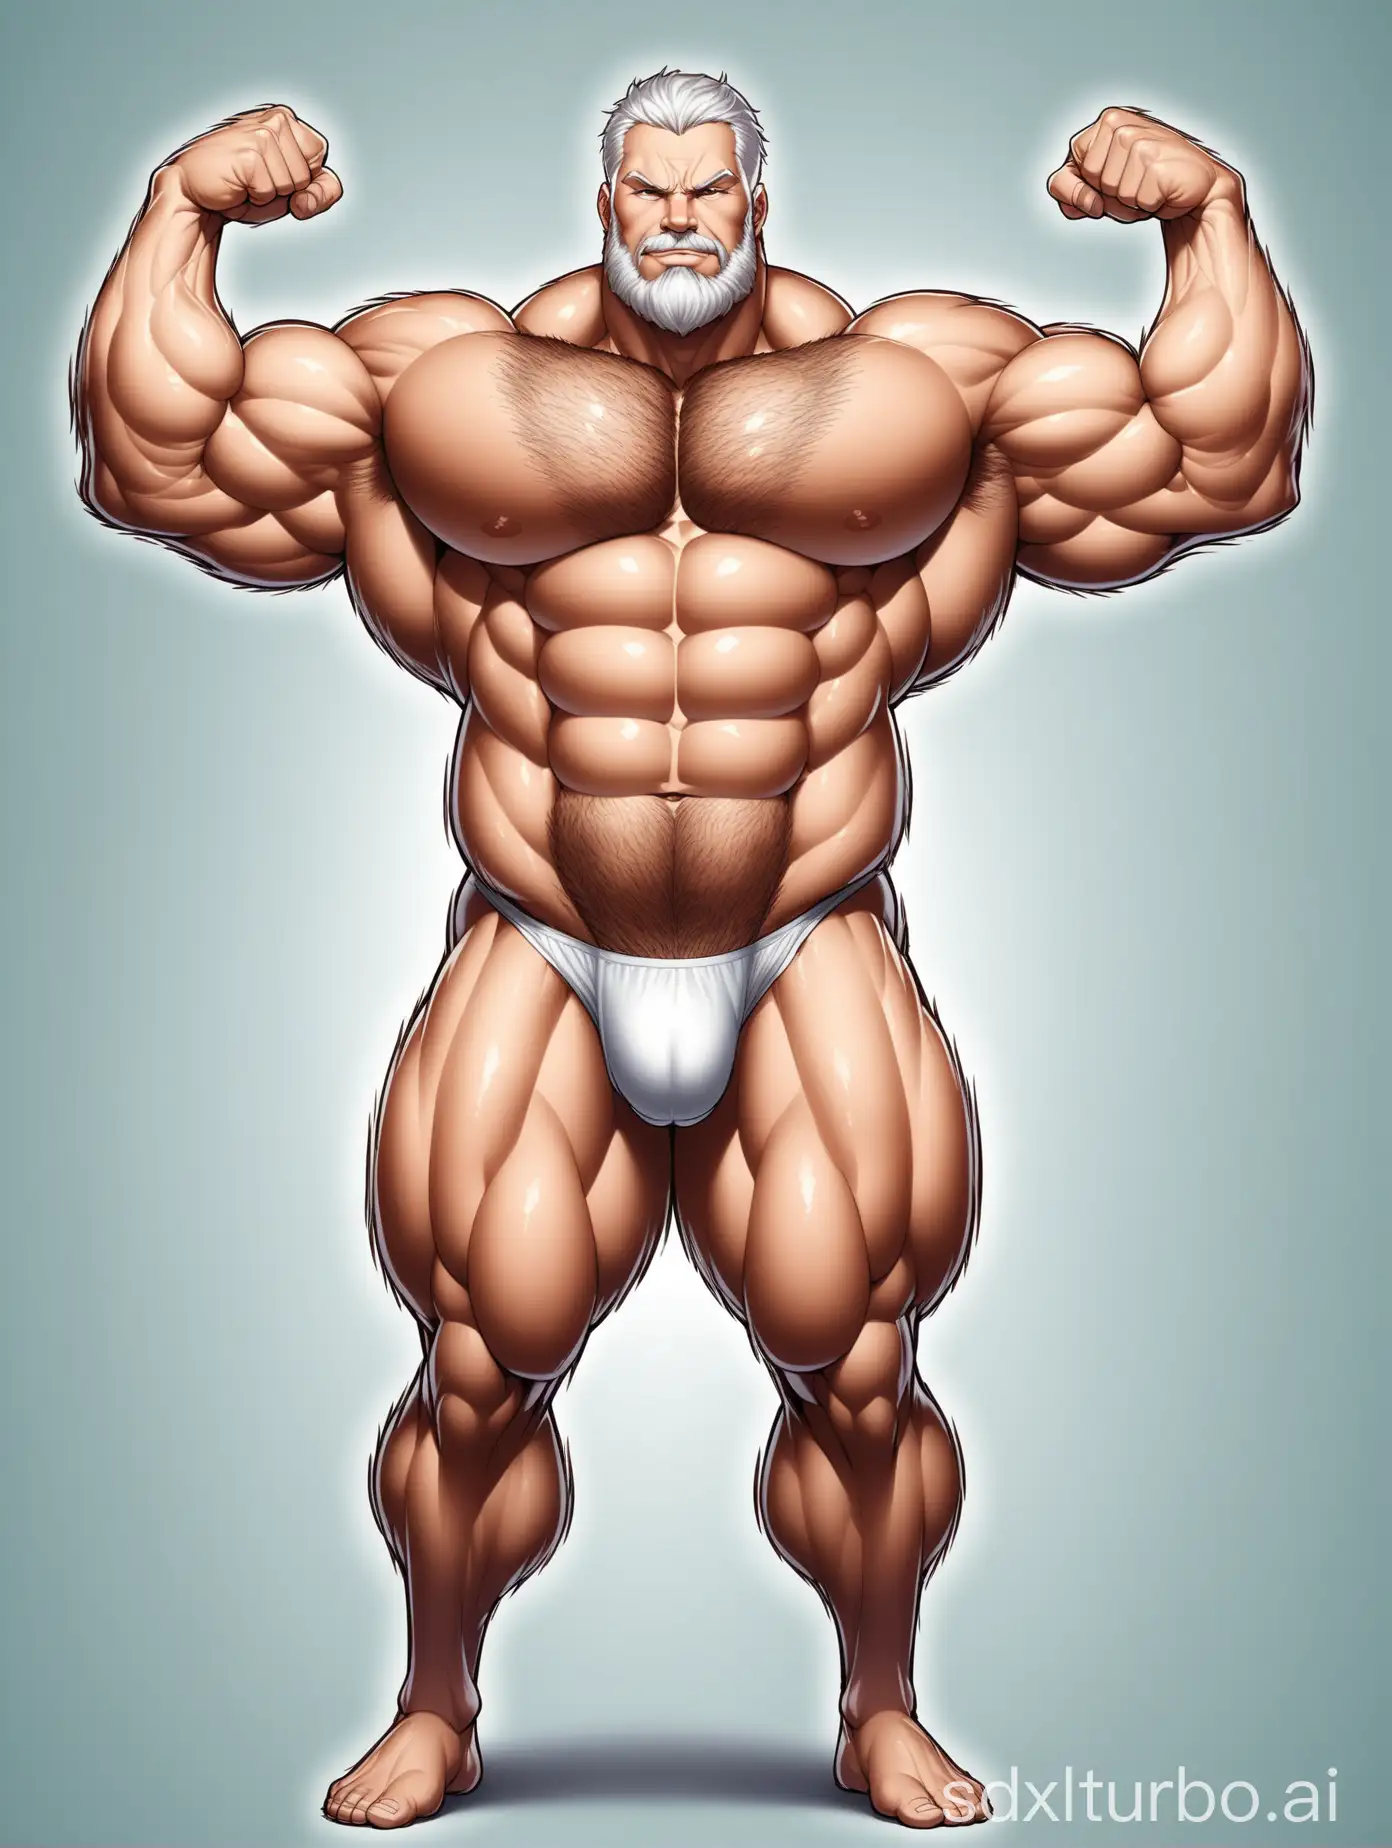 White skin and massive muscle stud, much bodyhair. Huge and giant and Strong body. Very Long and strong legs. 2m tall. very Big Chest. very Big biceps. 8-pack abs. Very Massive muscle Body. Wearing underwear. he is giant tall. very fat. very fat. very fat. Full Body diagram. very long strong legs.very long legs.very long legs. raise his arms to show his huge biceps. raise his arms to show his huge biceps.very old man.very handsome men.